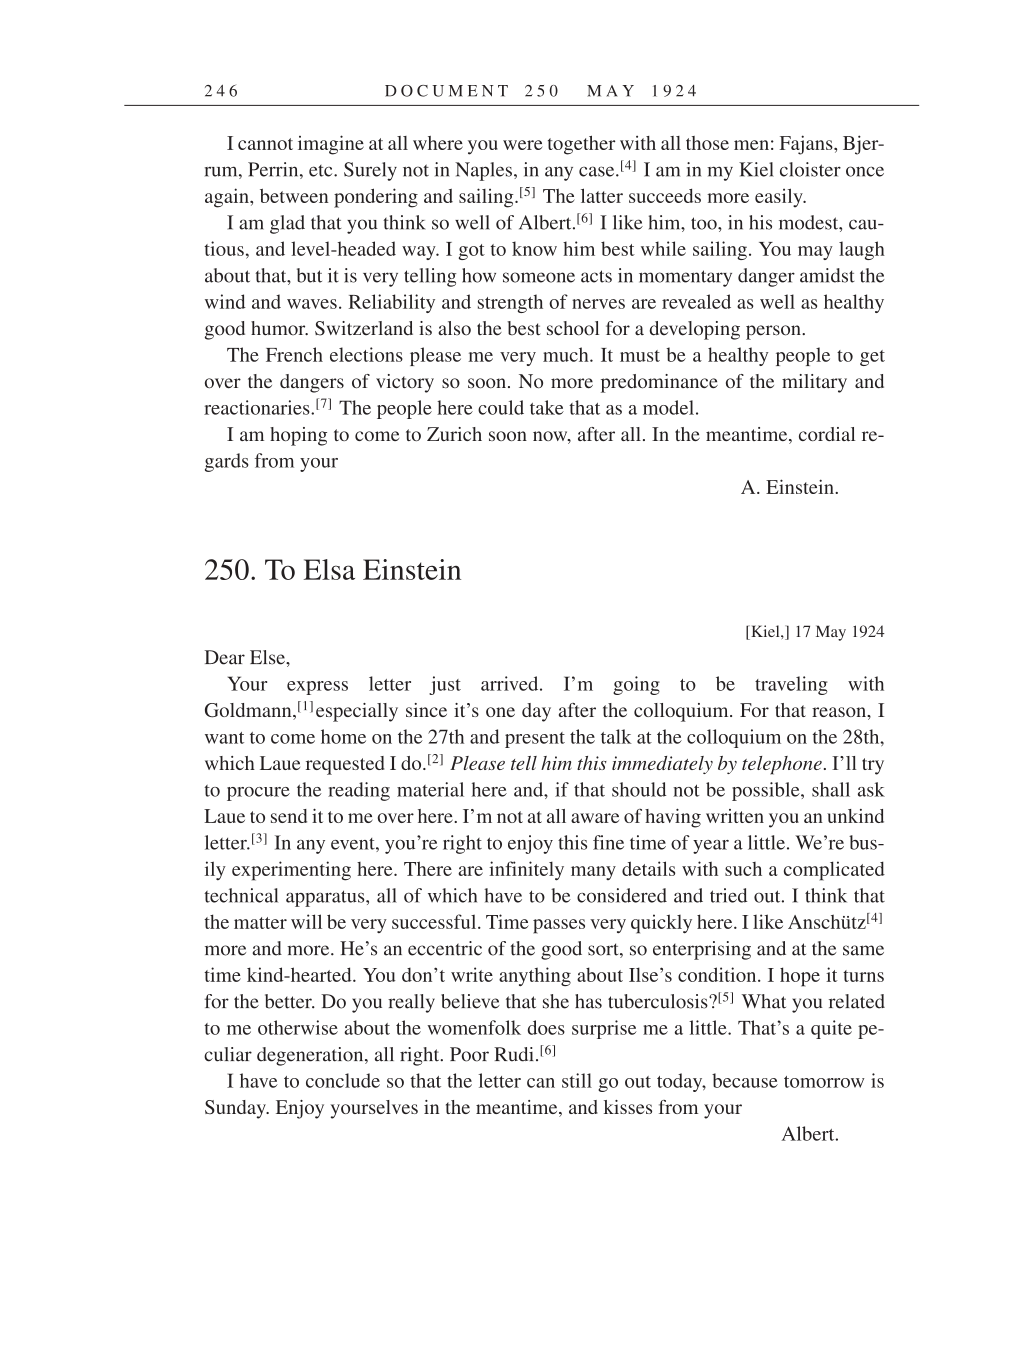 Volume 14: The Berlin Years: Writings & Correspondence, April 1923-May 1925 (English Translation Supplement) page 246